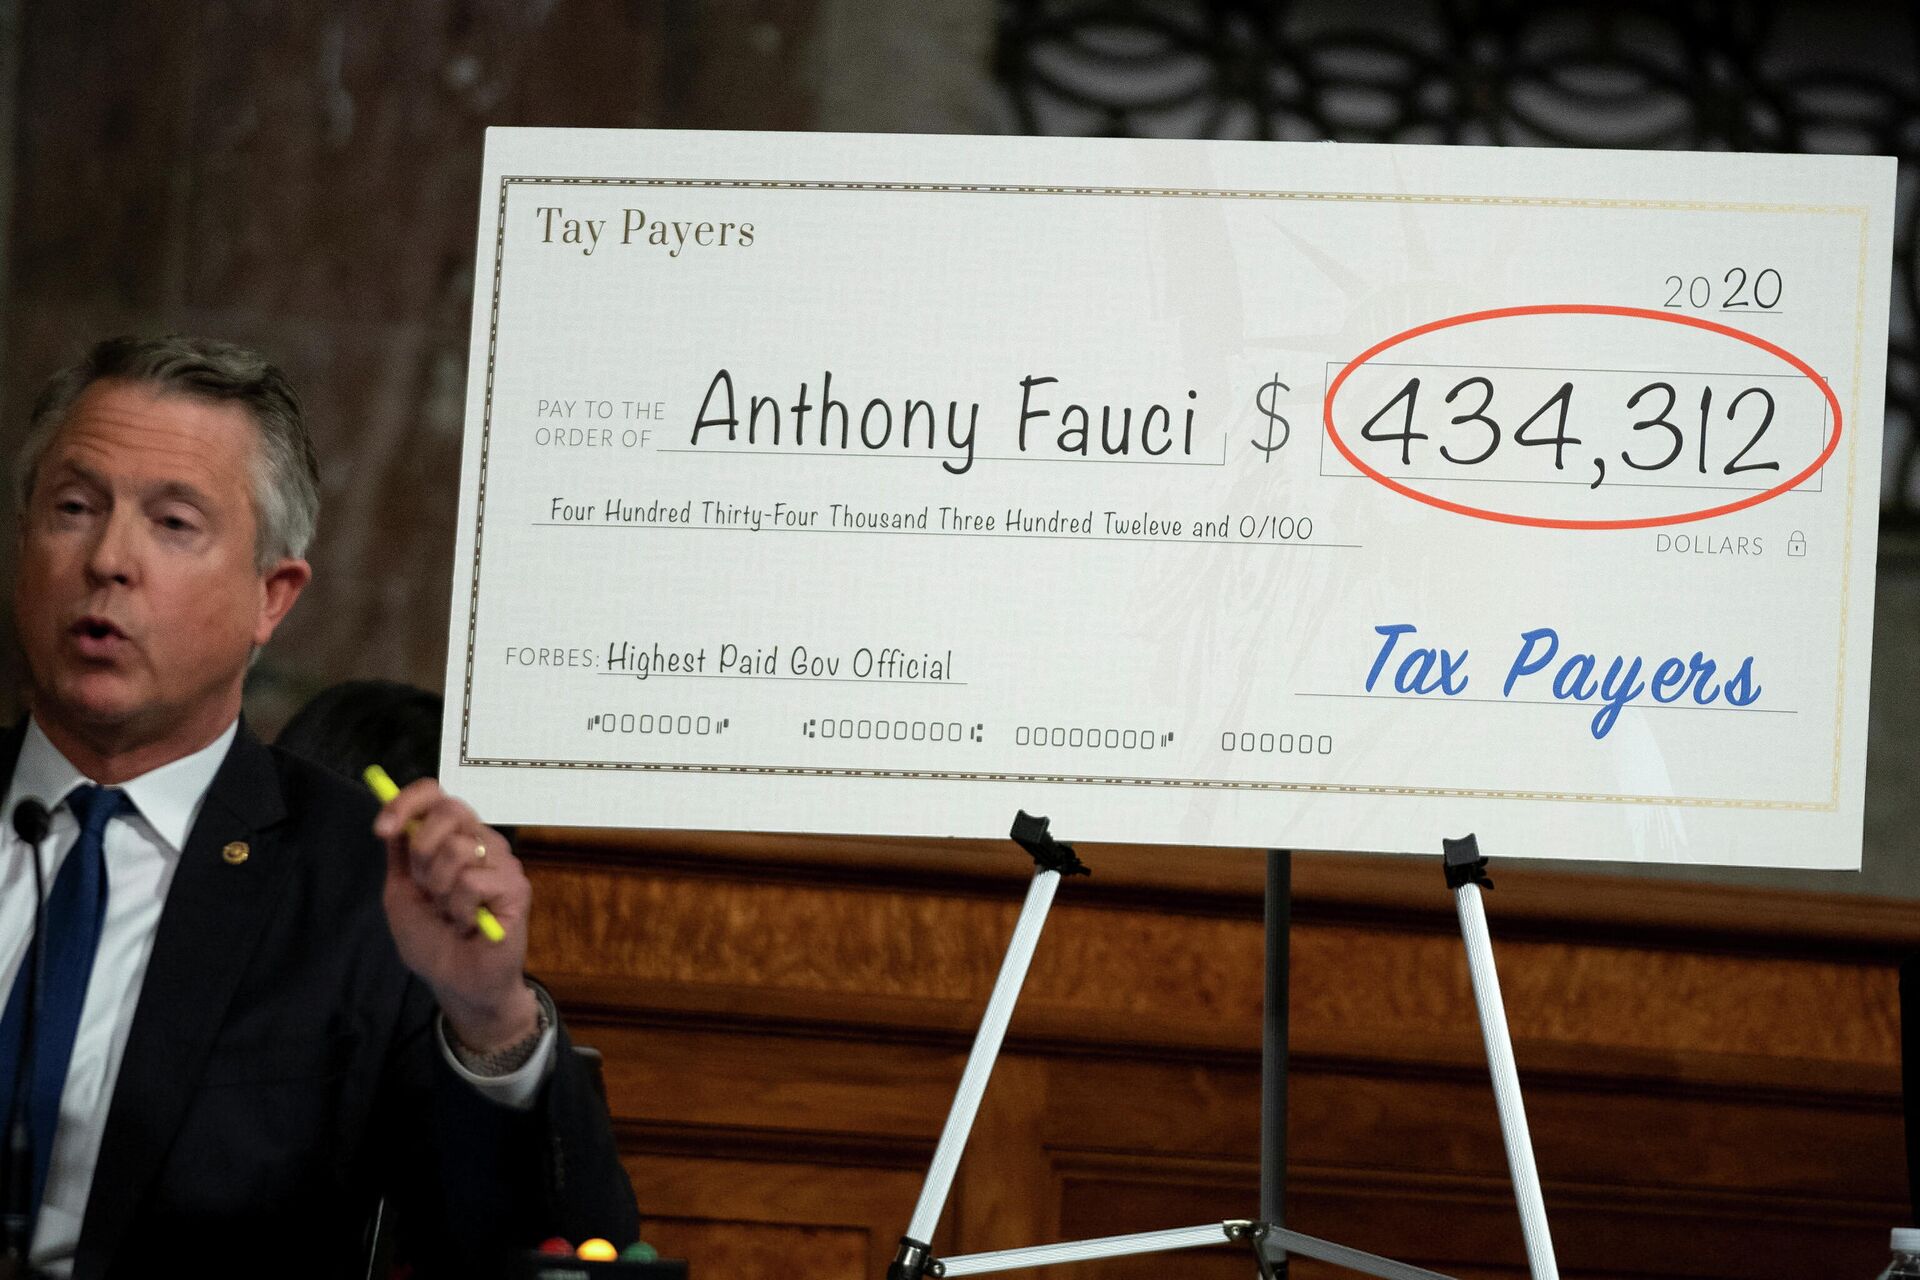 U.S. Senator Roger Marshall (R-KS) shows the yearly pay received by Dr. Anthony Fauci, director of the National Institute of Allergy and Infectious Diseases and White House Chief Medical Advisor during a Senate Health, Education, Labor, and Pensions Committee hearing to examine the federal response to the coronavirus disease (COVID-19) and new emerging variants at Capitol Hill in Washington, D.C., U.S.  January 11, 2022 - Sputnik International, 1920, 12.01.2022